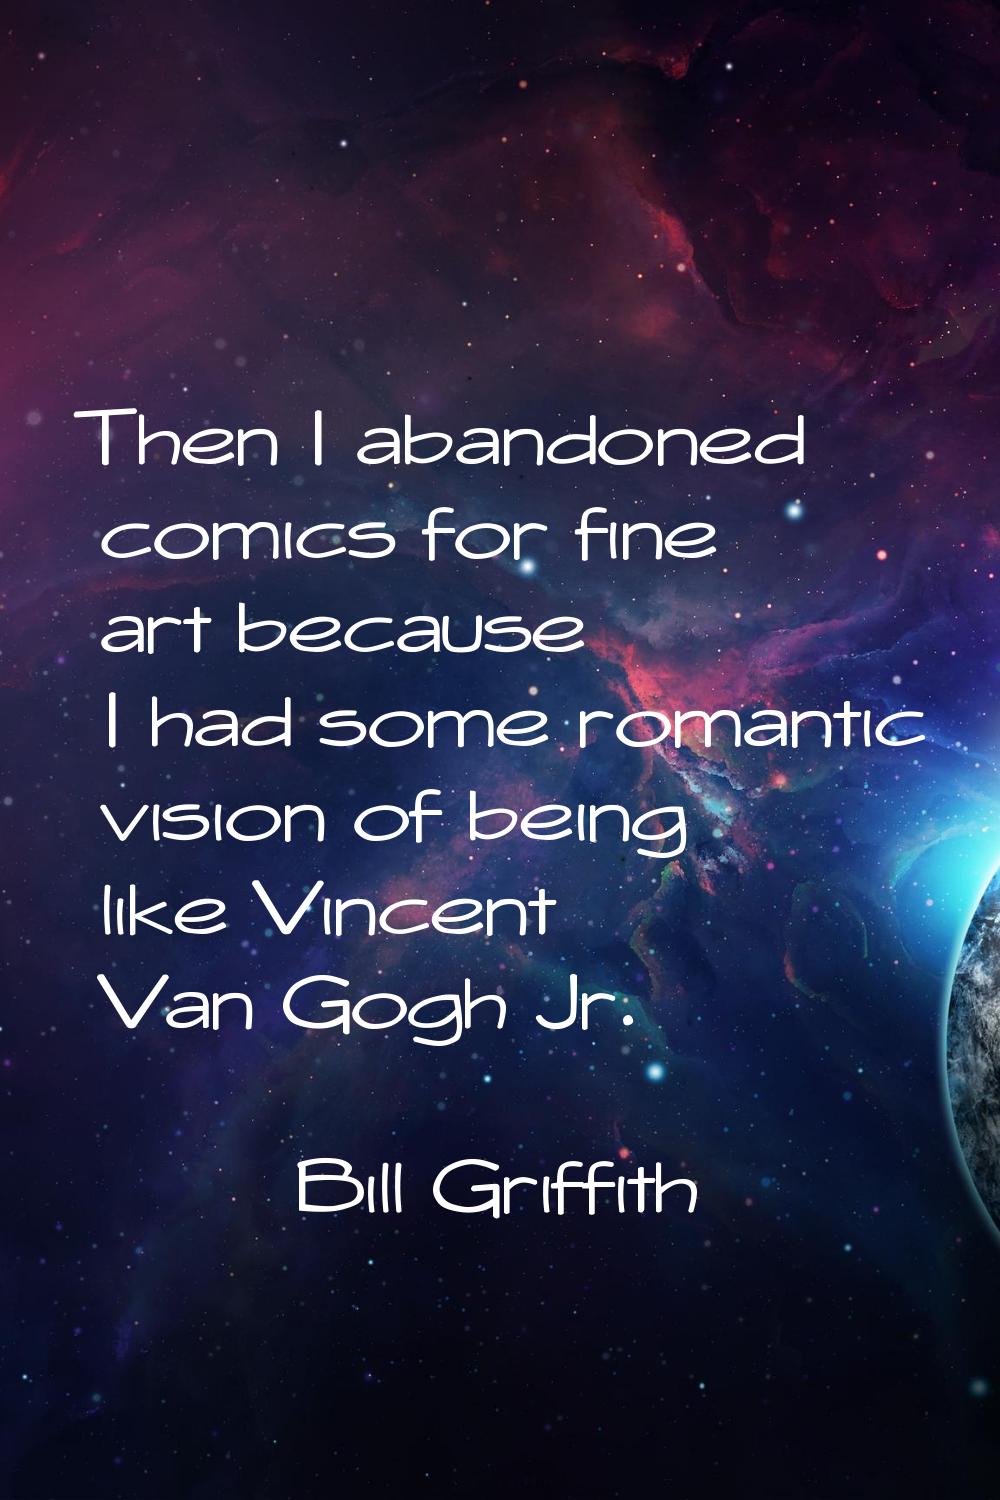 Then I abandoned comics for fine art because I had some romantic vision of being like Vincent Van G